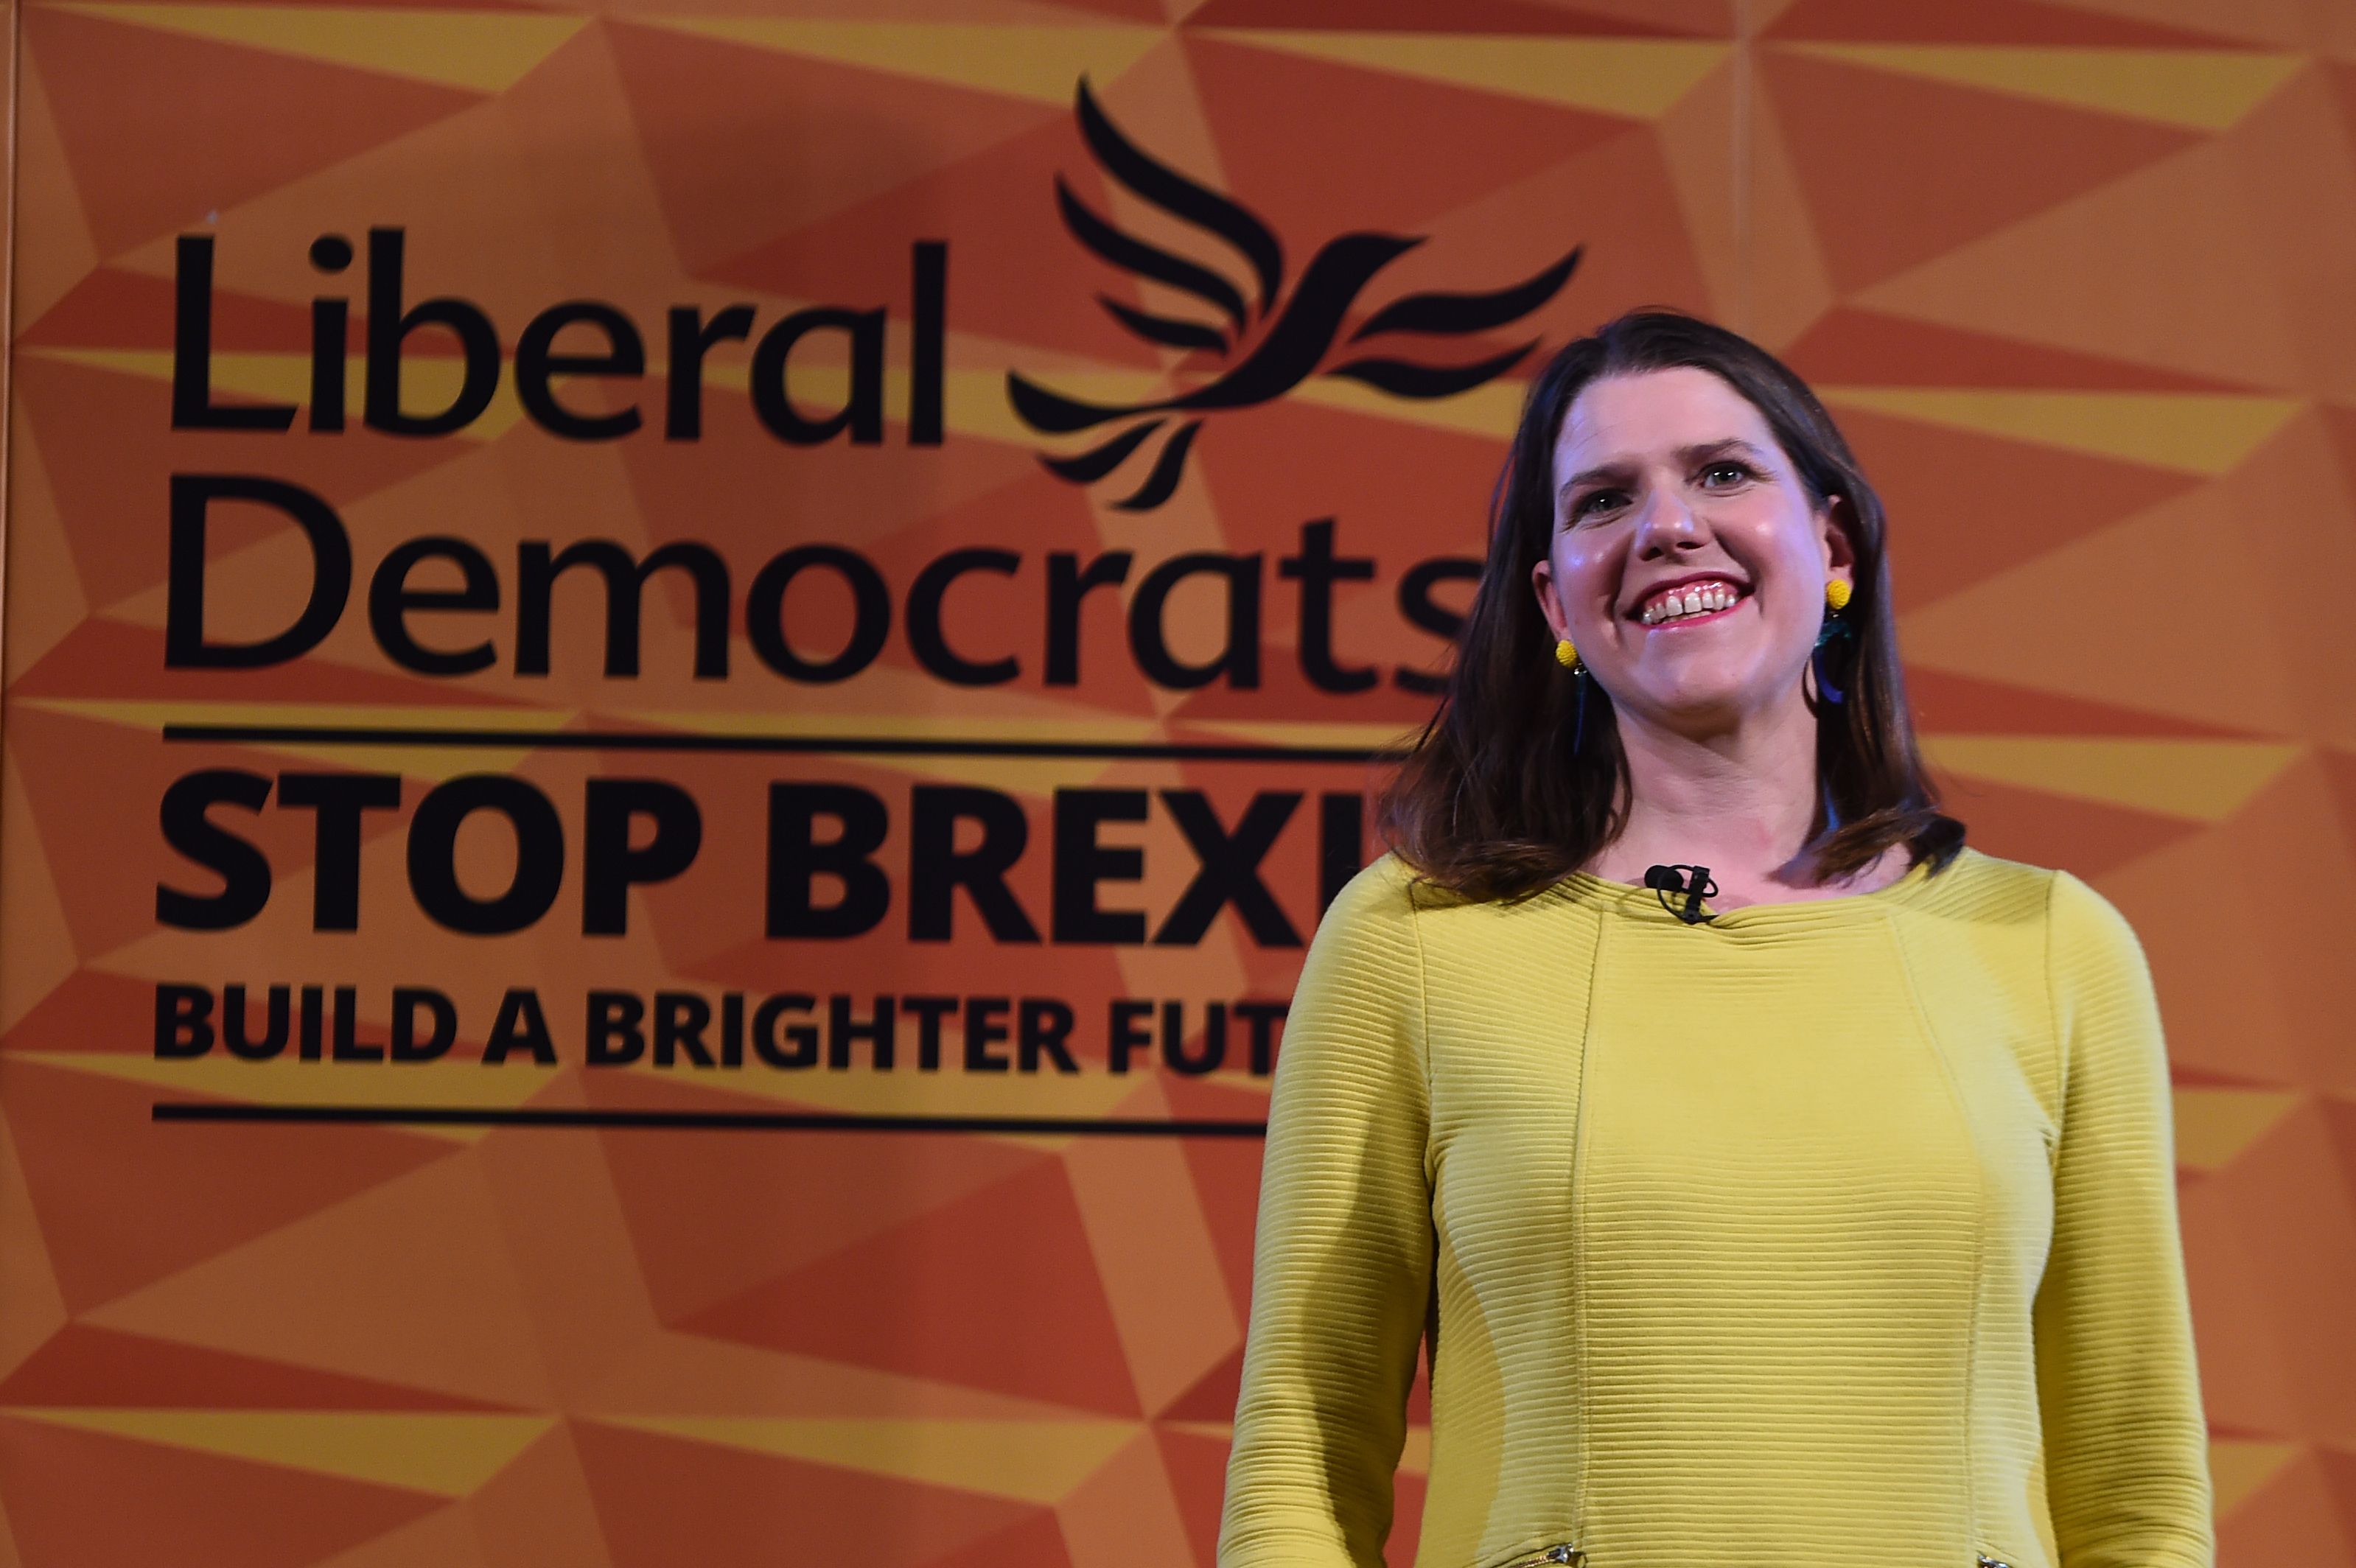 Liberal Democrats leader Jo Swinson distanced herself from the views of several Lib Dem candidates 